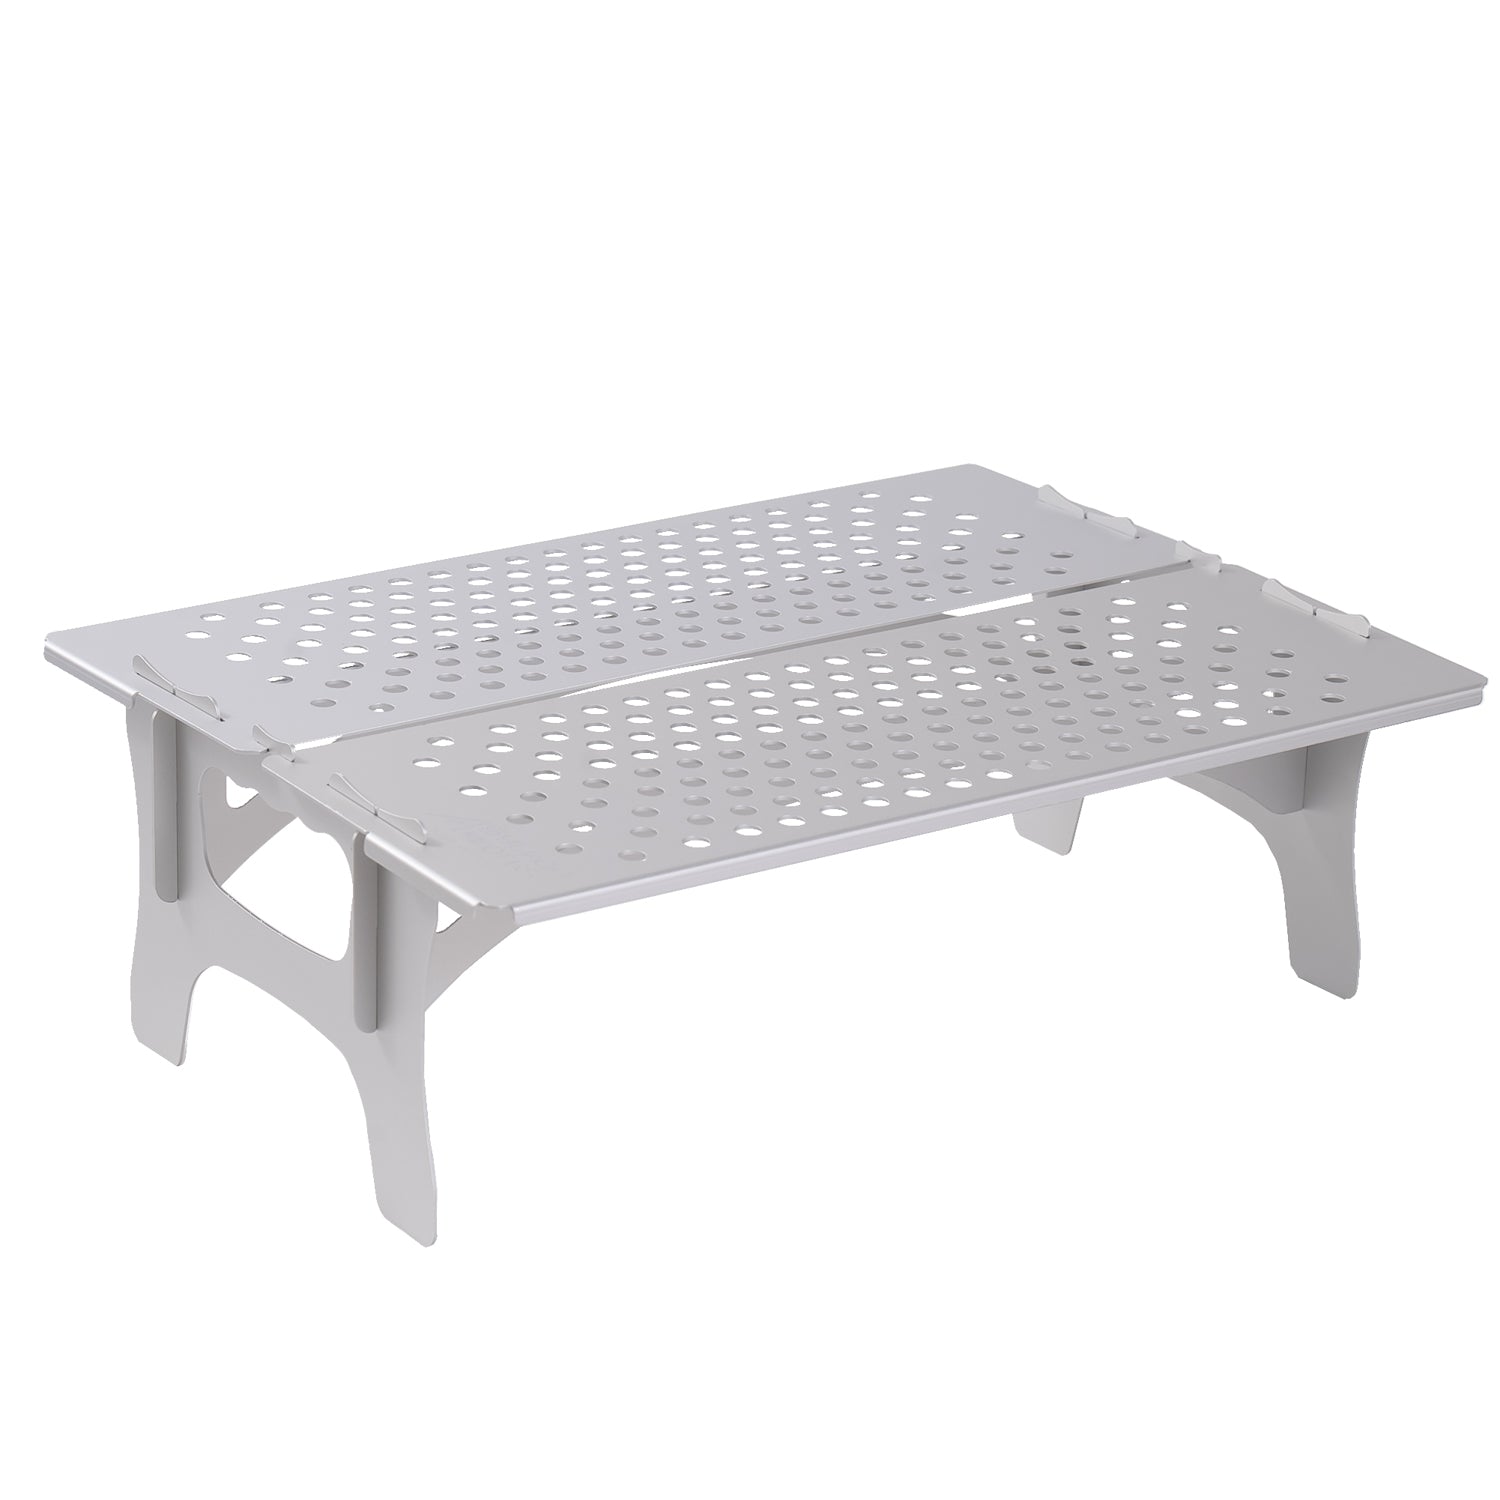 MKS Sylvan Works Solow Table